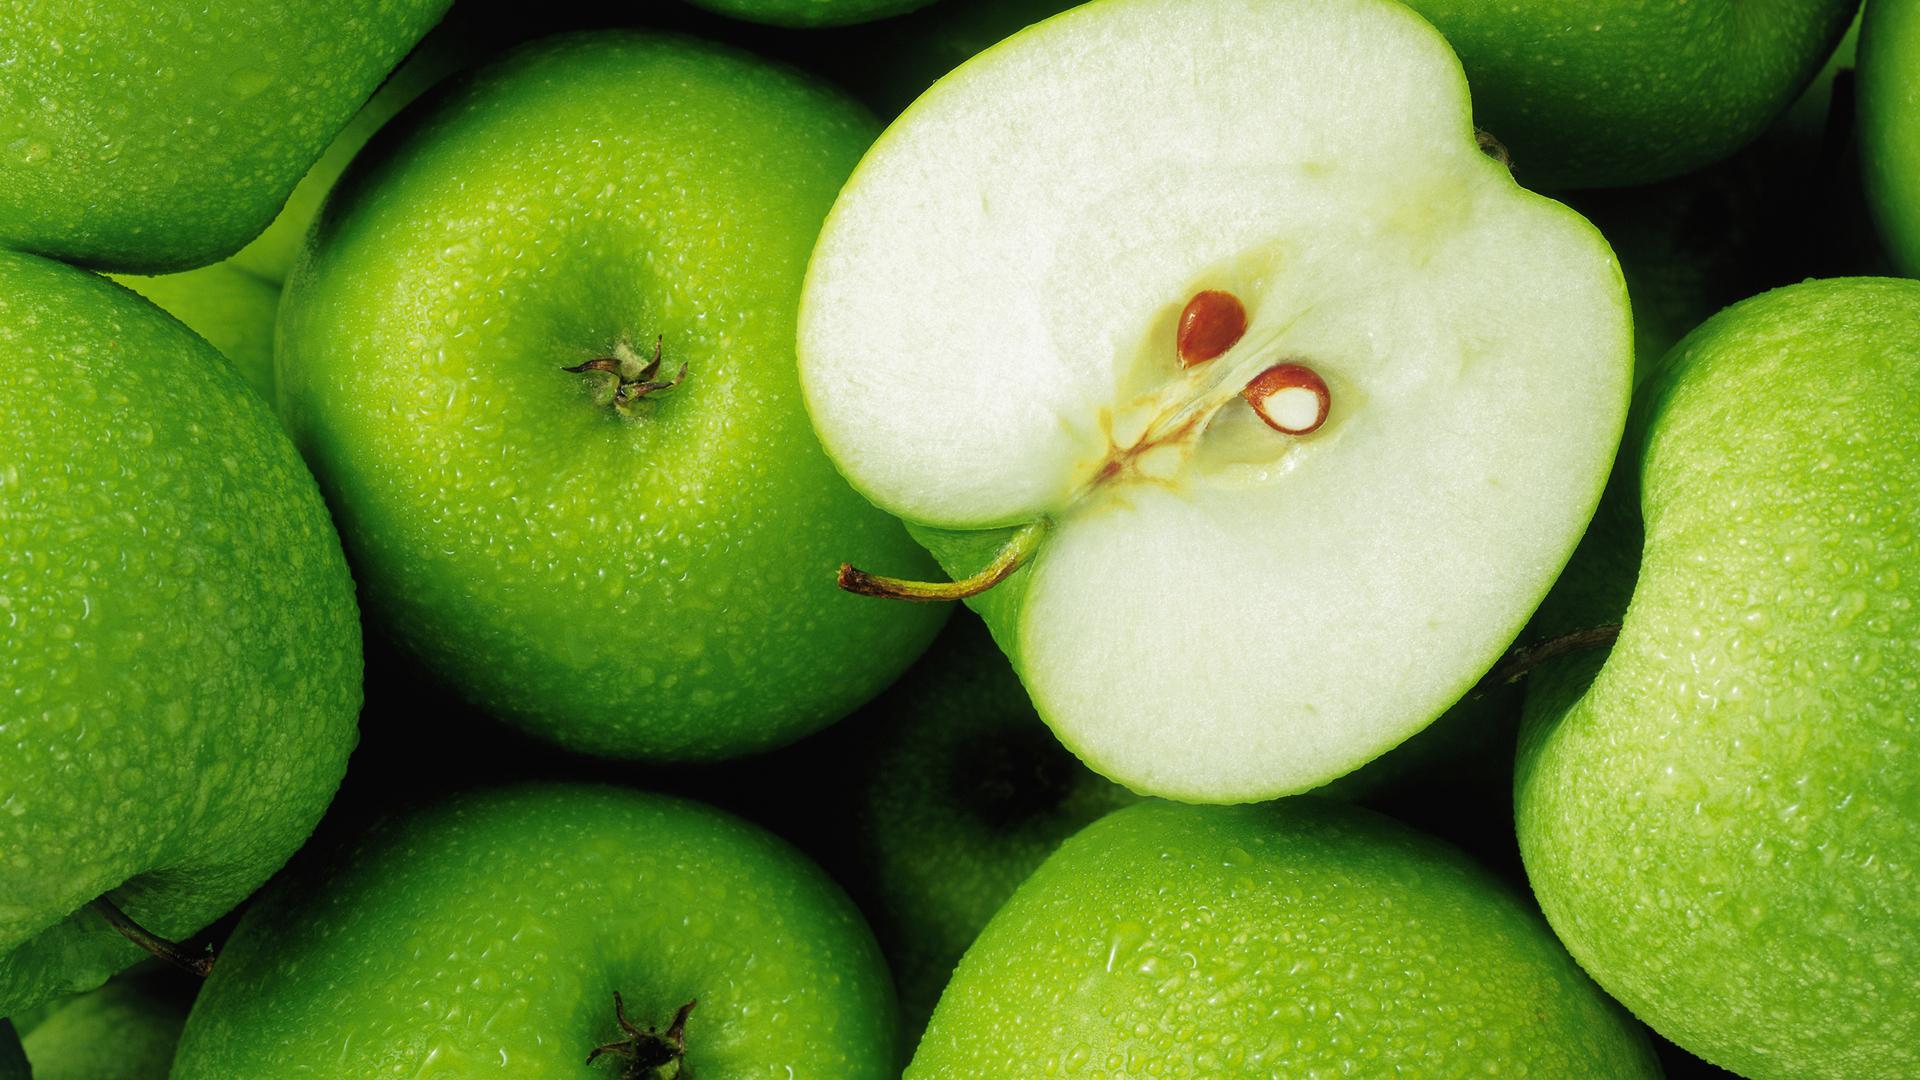 Green apple fruit wallpaper for Android